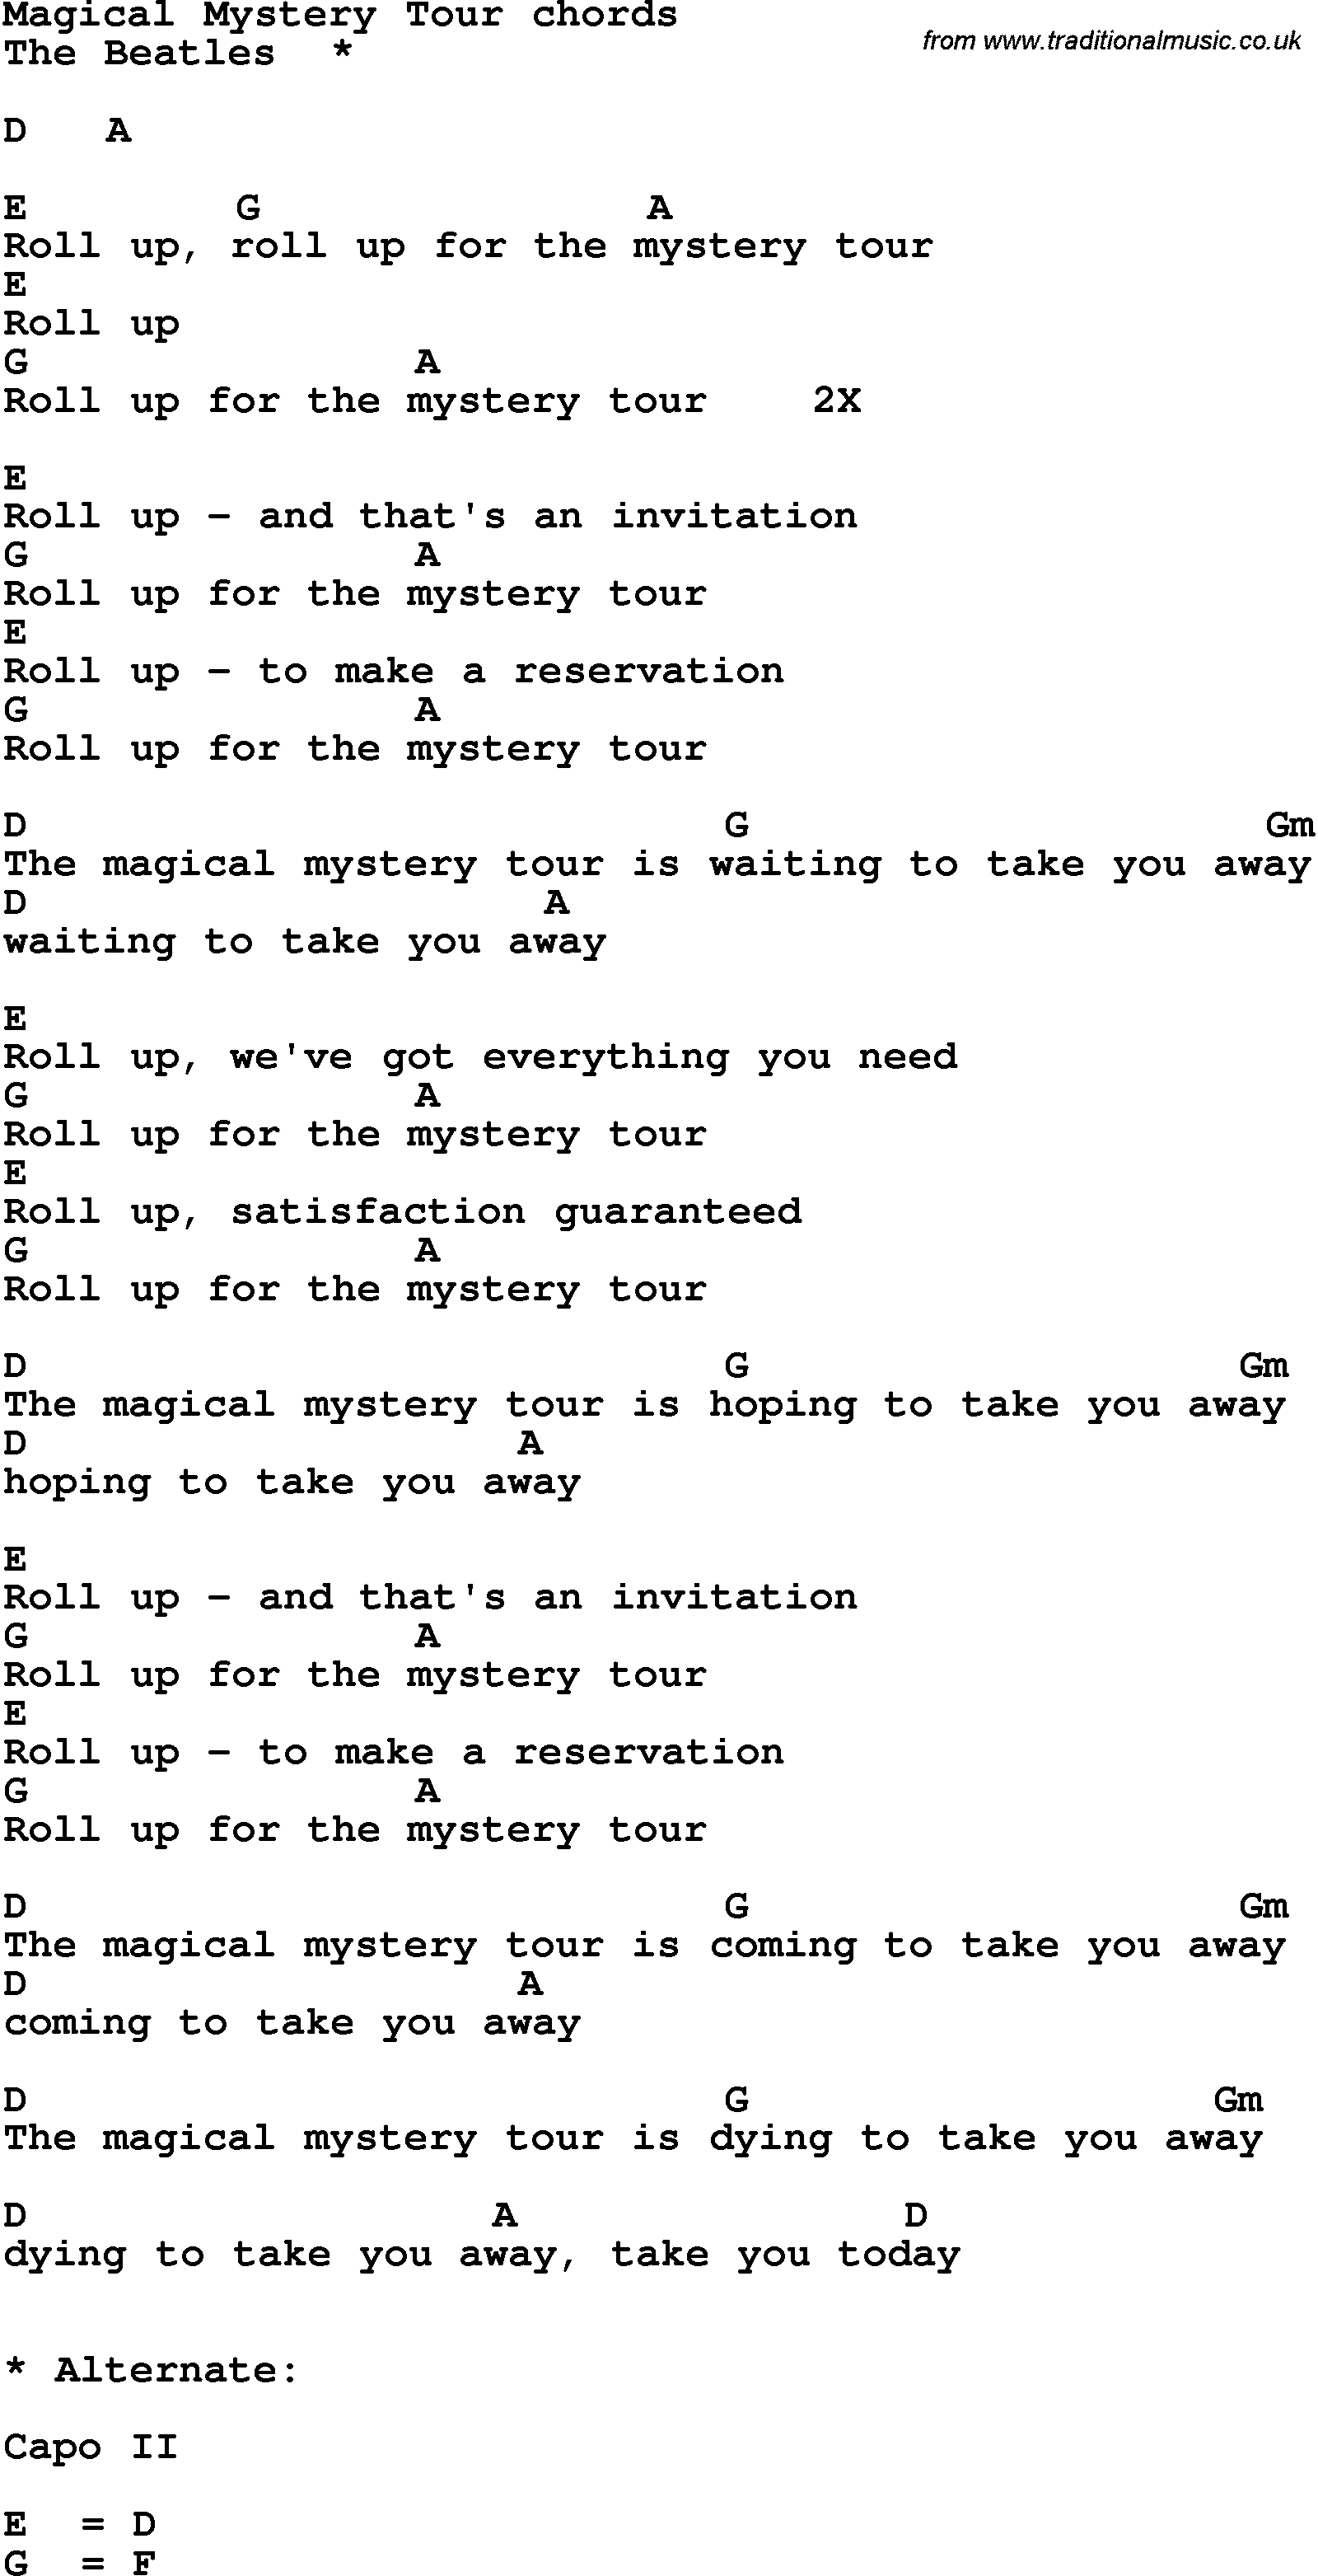 Song Lyrics with guitar chords for Magical Mystery Tour - The Beatles